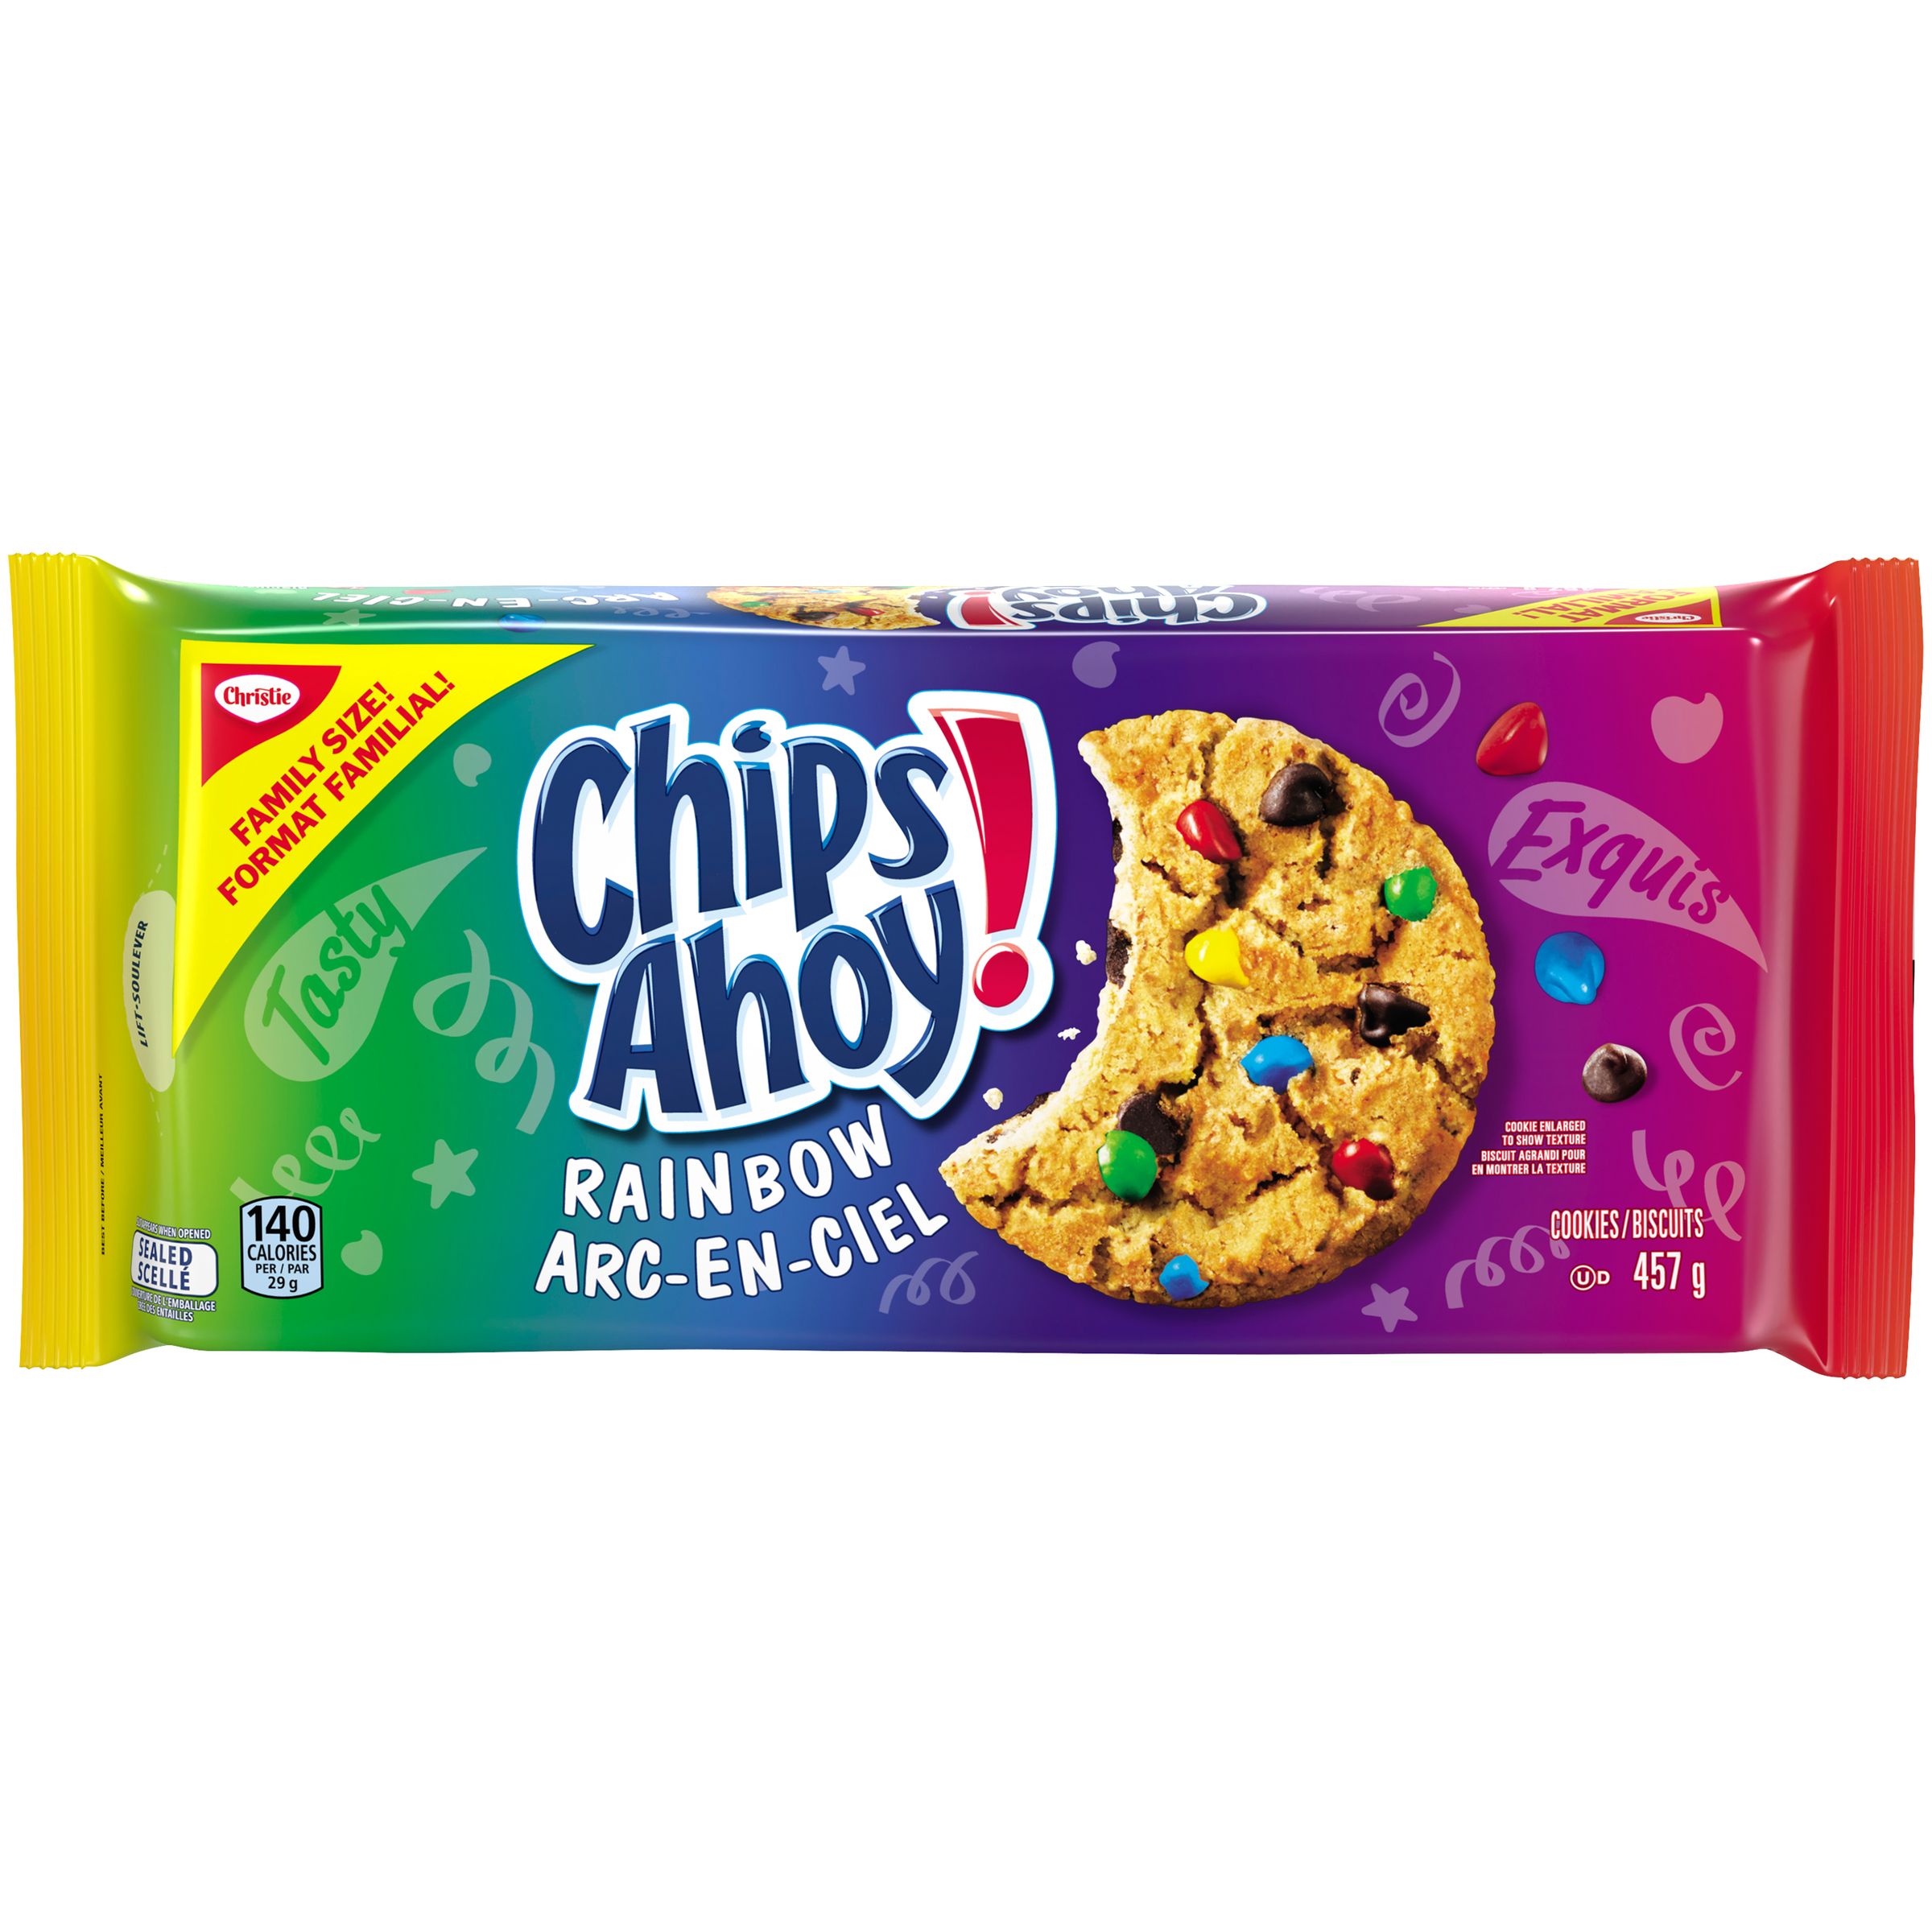 CHIPS AHOY! Rainbow Chocolate Chip Cookies, 1 Family Resealable Pack (457g)